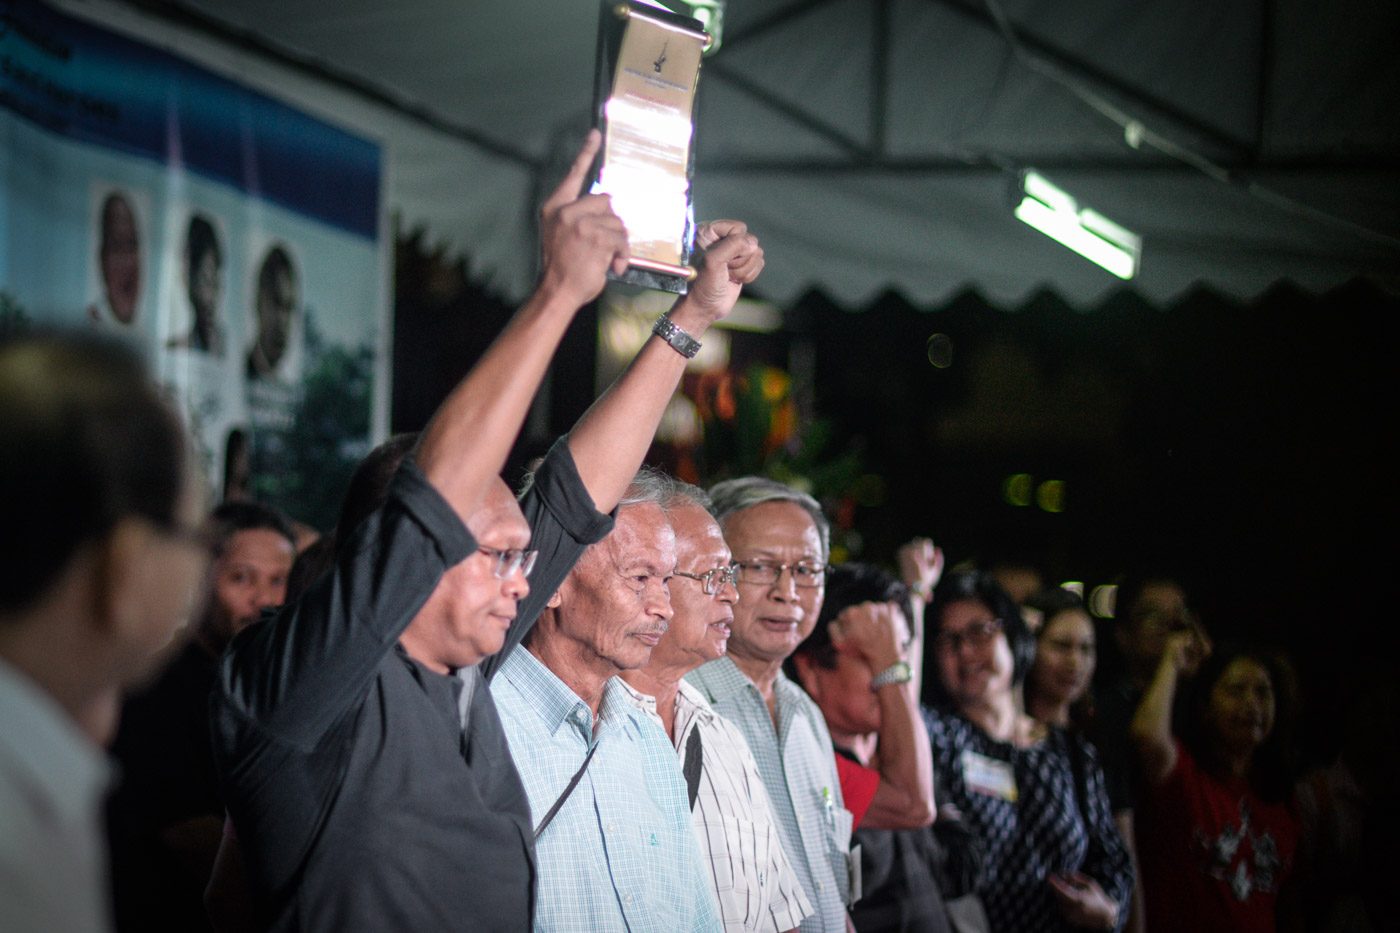 Mel Cortez raises his clenched fist after receiving the citation for his fallen brother fallen and trade union organizer Hernando Cortez from the Bantayog ng mga Bayani Foundation 